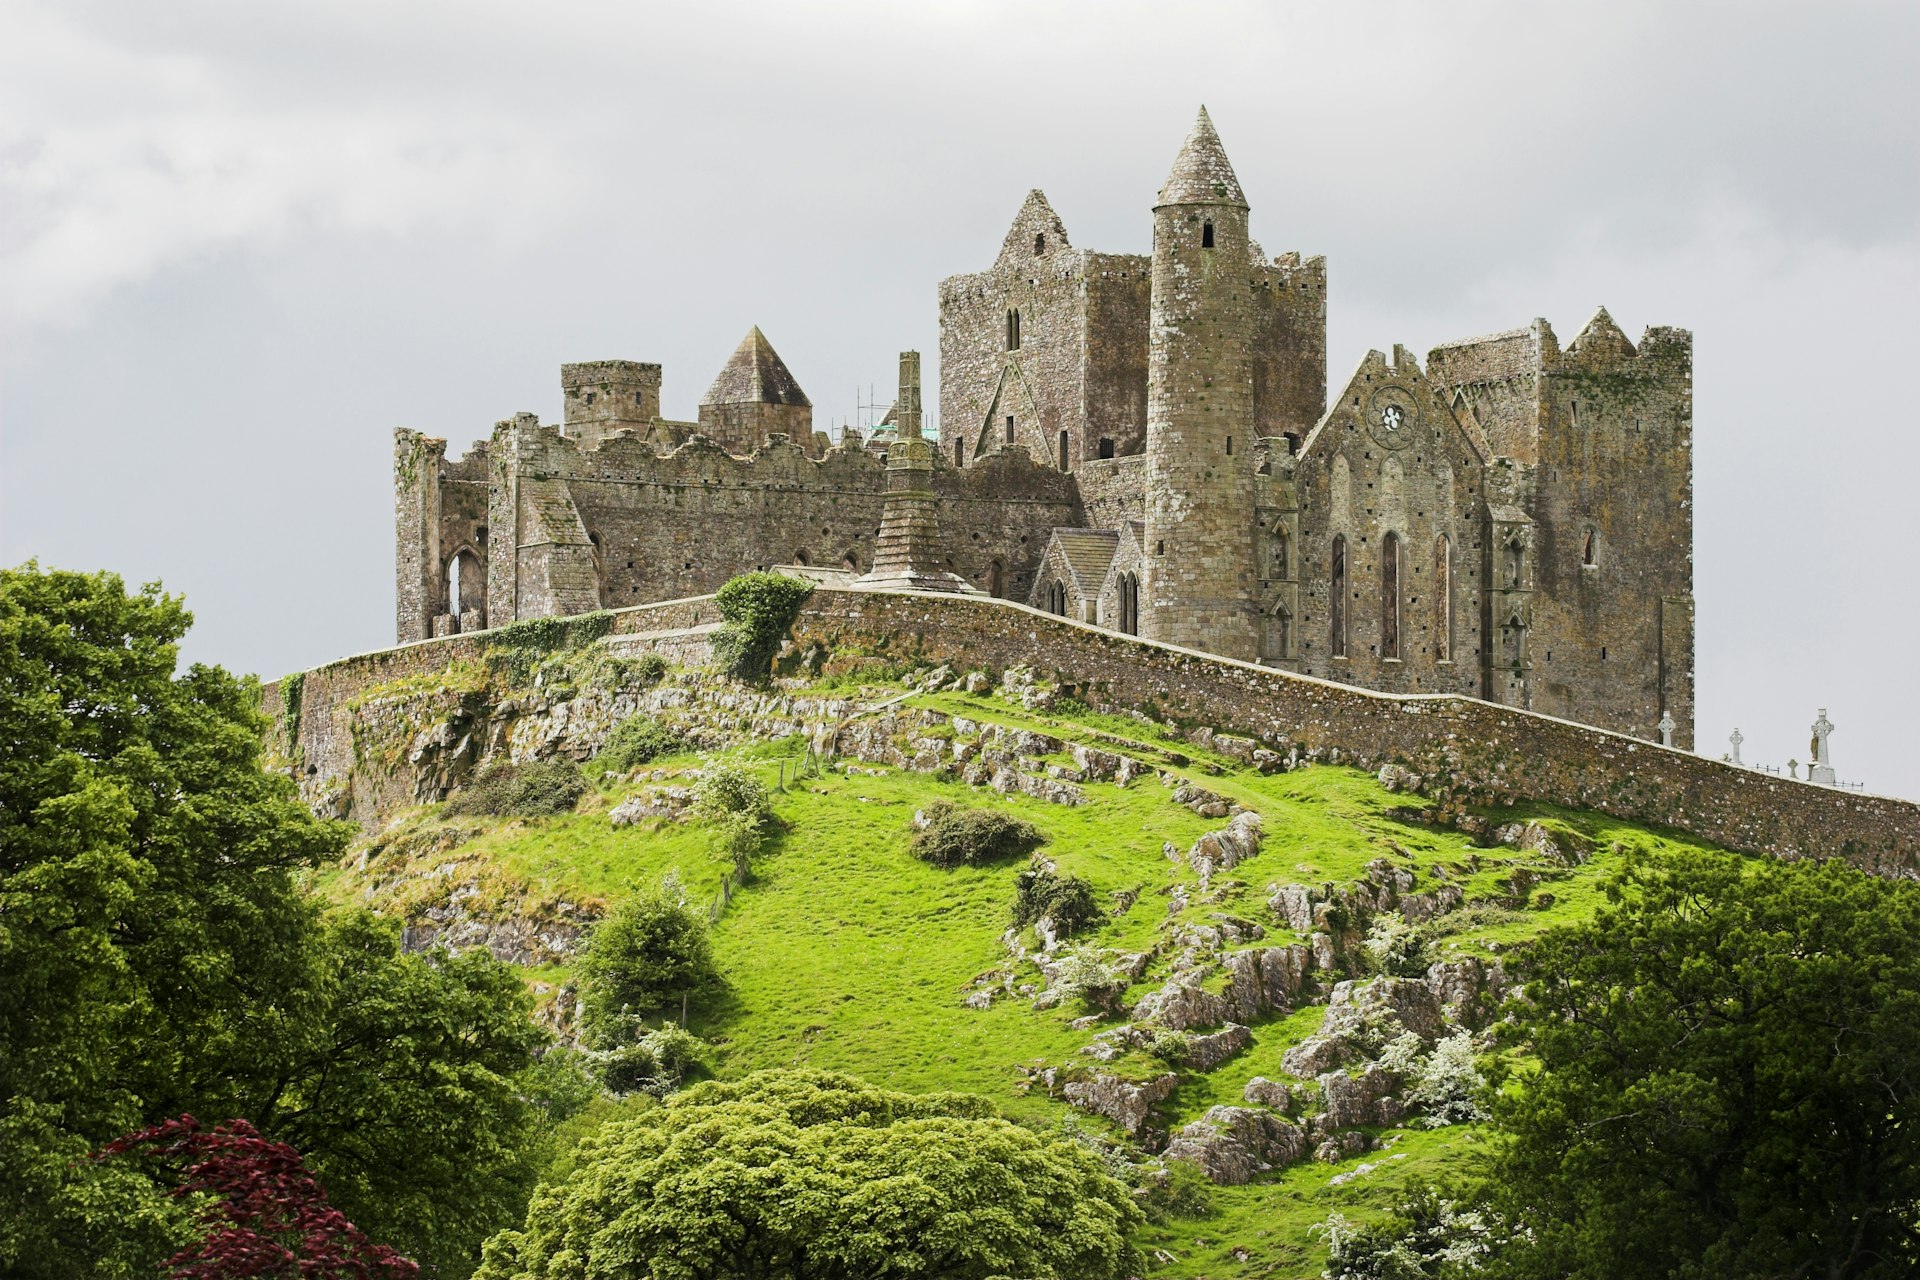 The exterior of the Rock of Cashel in Tipperary